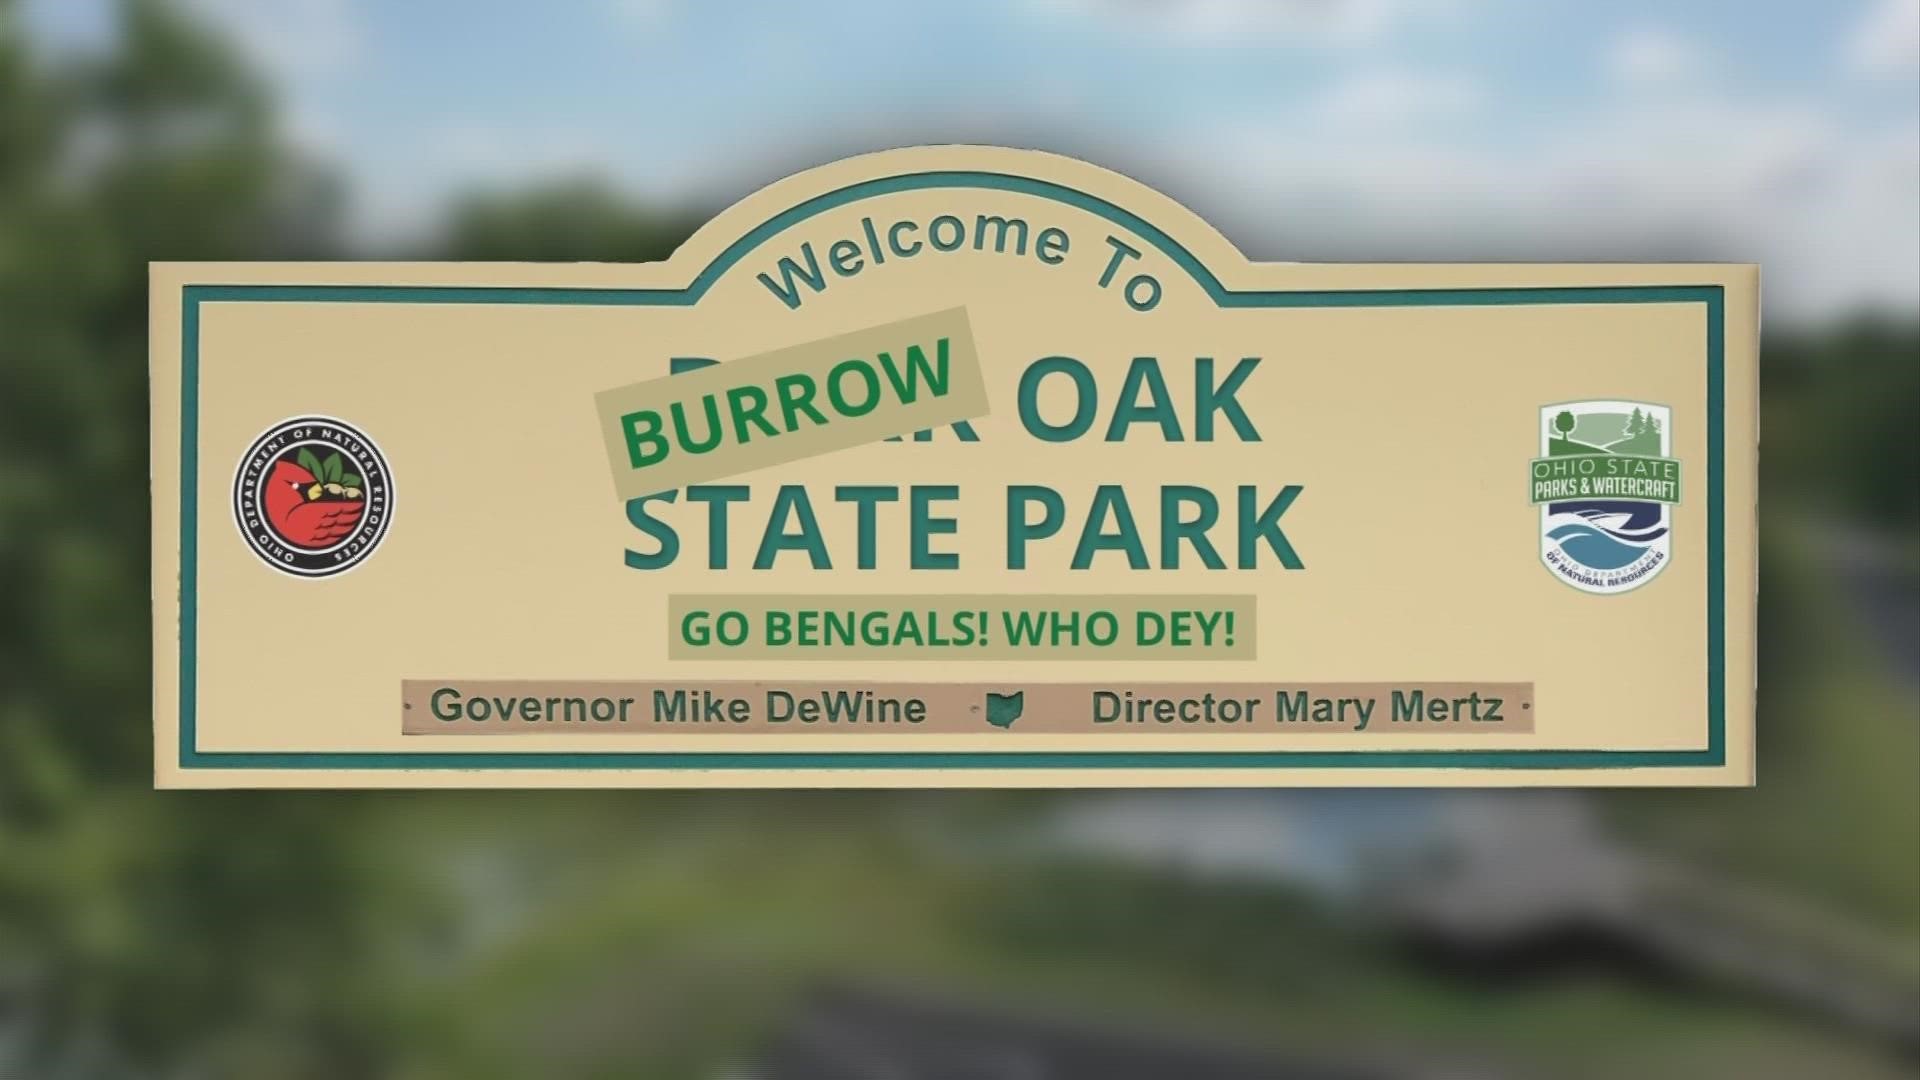 The three parks will now be temporarily referred to as “Burrow Oak State Park," “Evan McPherson Extra Point Creek State Park" and "Ickey Woods State Park."